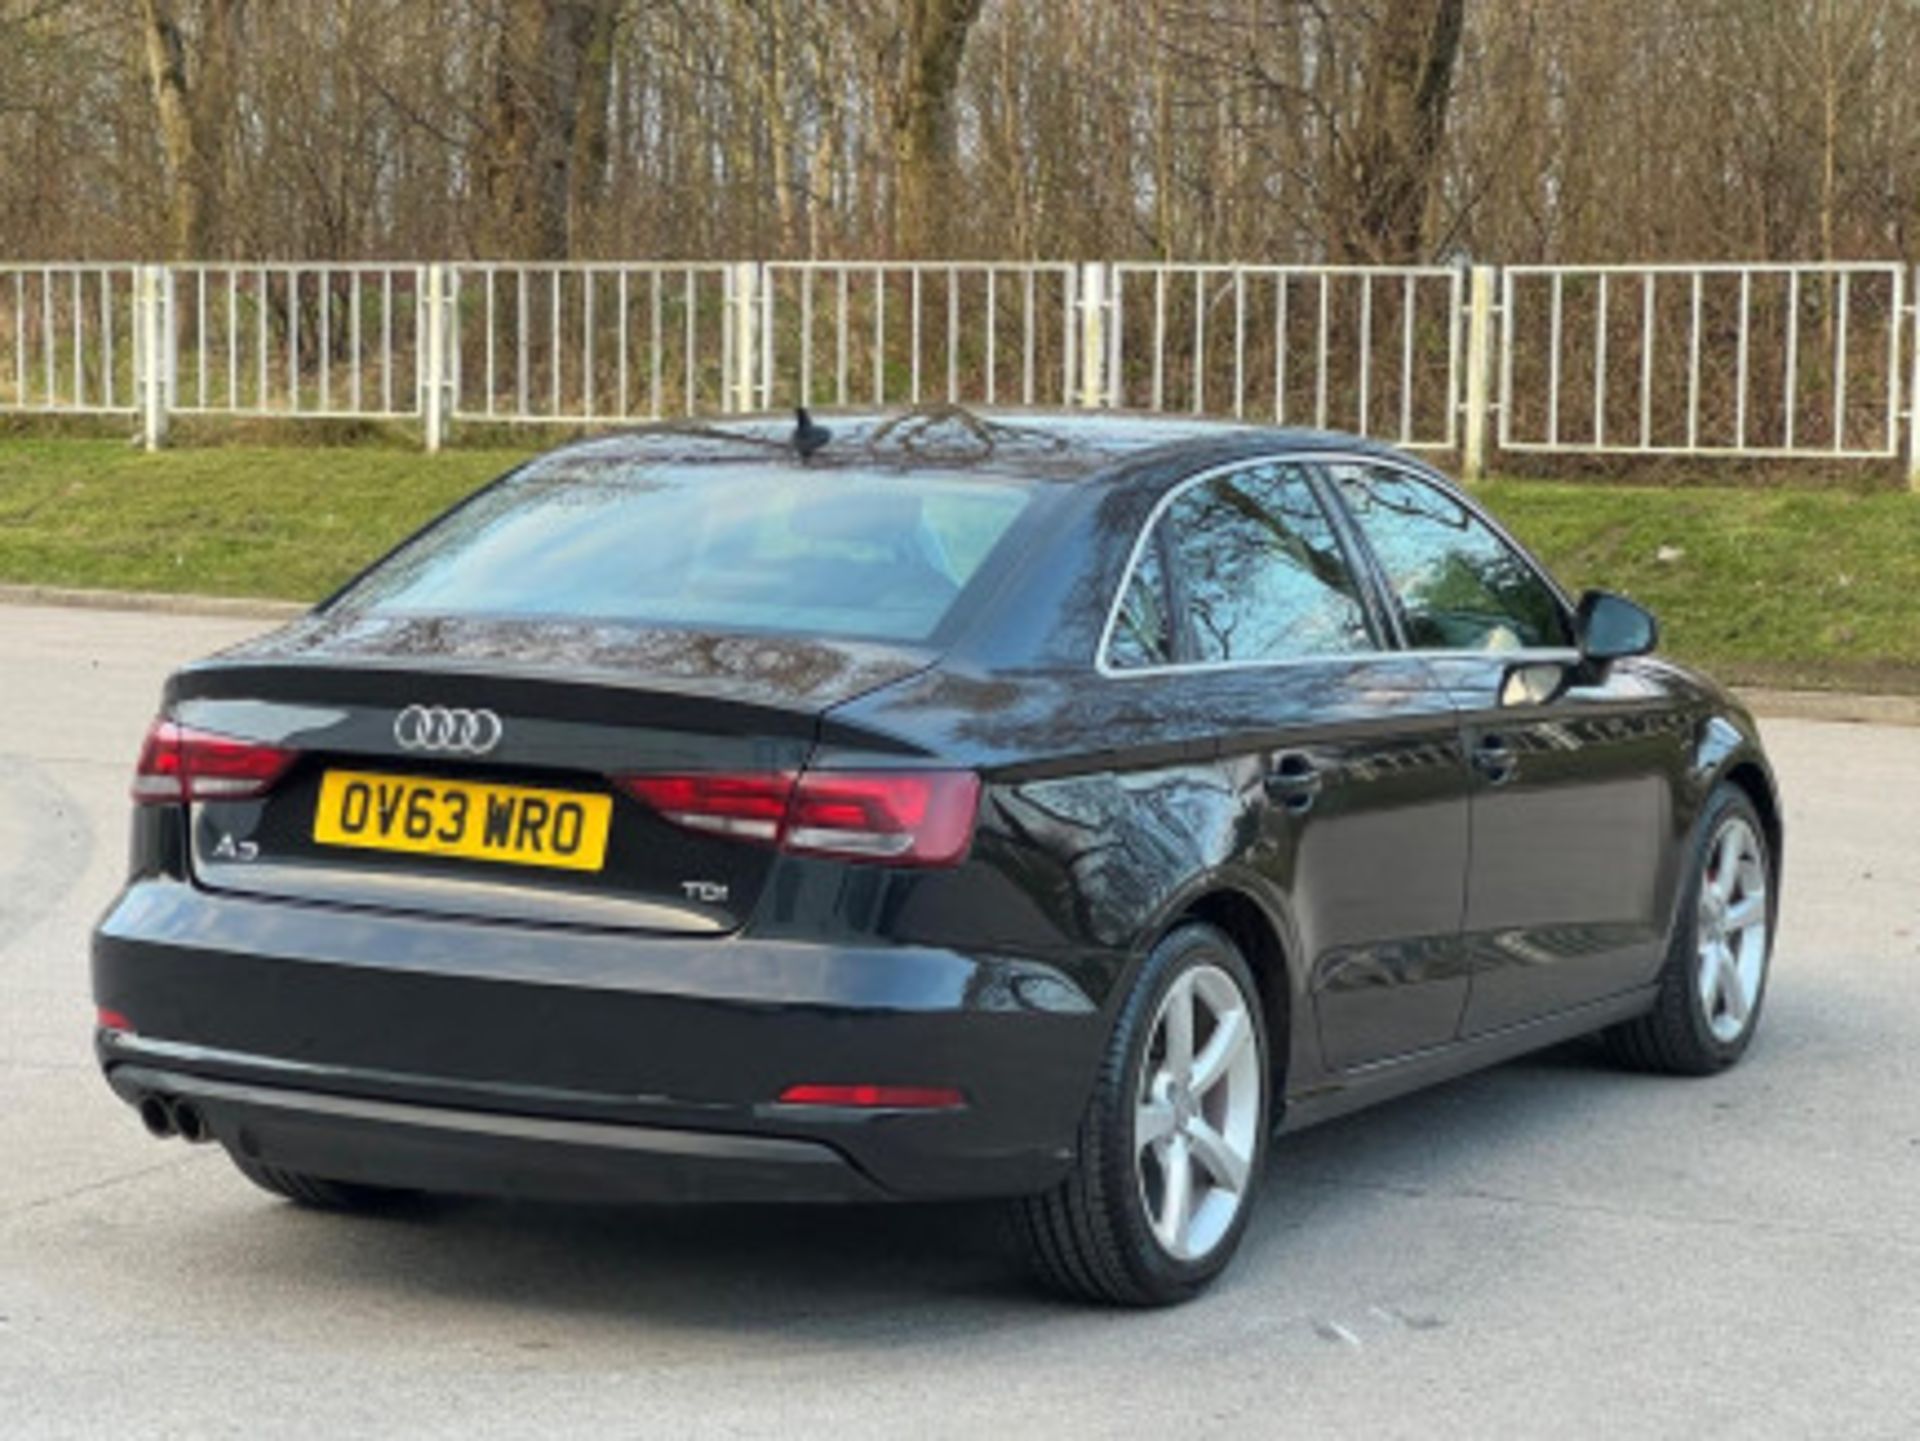 AUDI A3 2.0TDI SPORTBACK - STYLE, PERFORMANCE, AND COMFORT COMBINED >>--NO VAT ON HAMMER--<< - Image 58 of 216